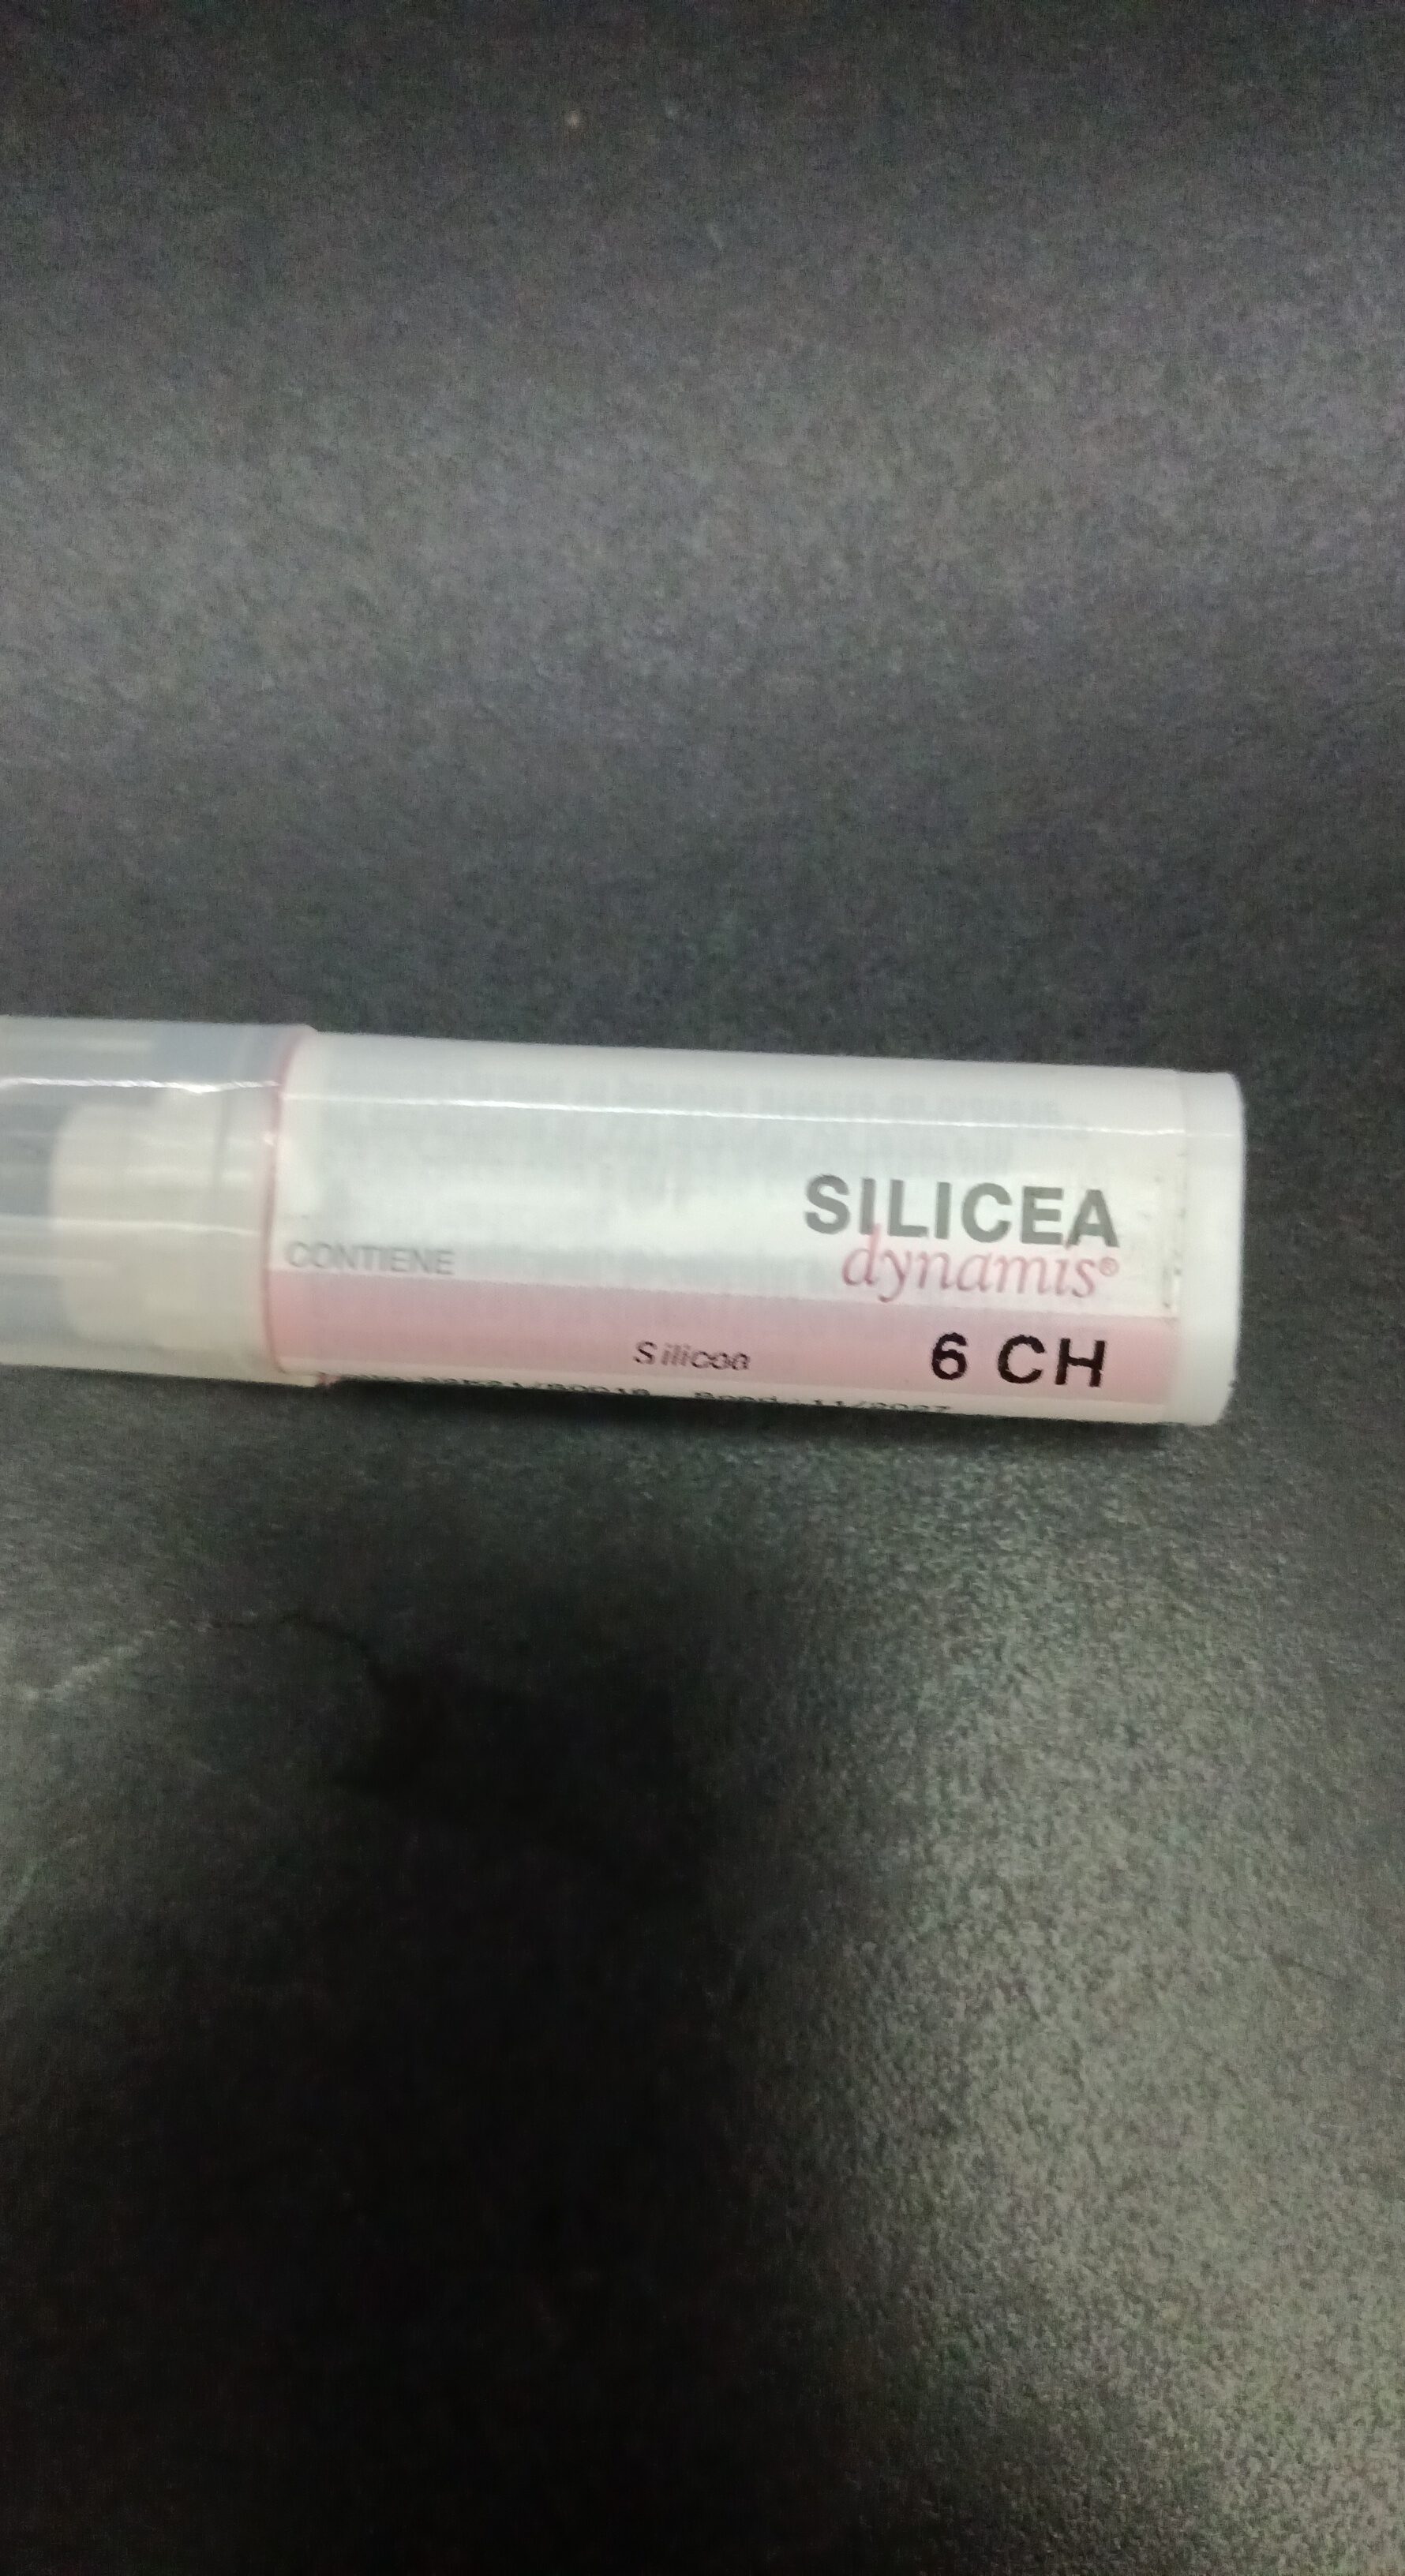 SILICEA 6CH - Product - it